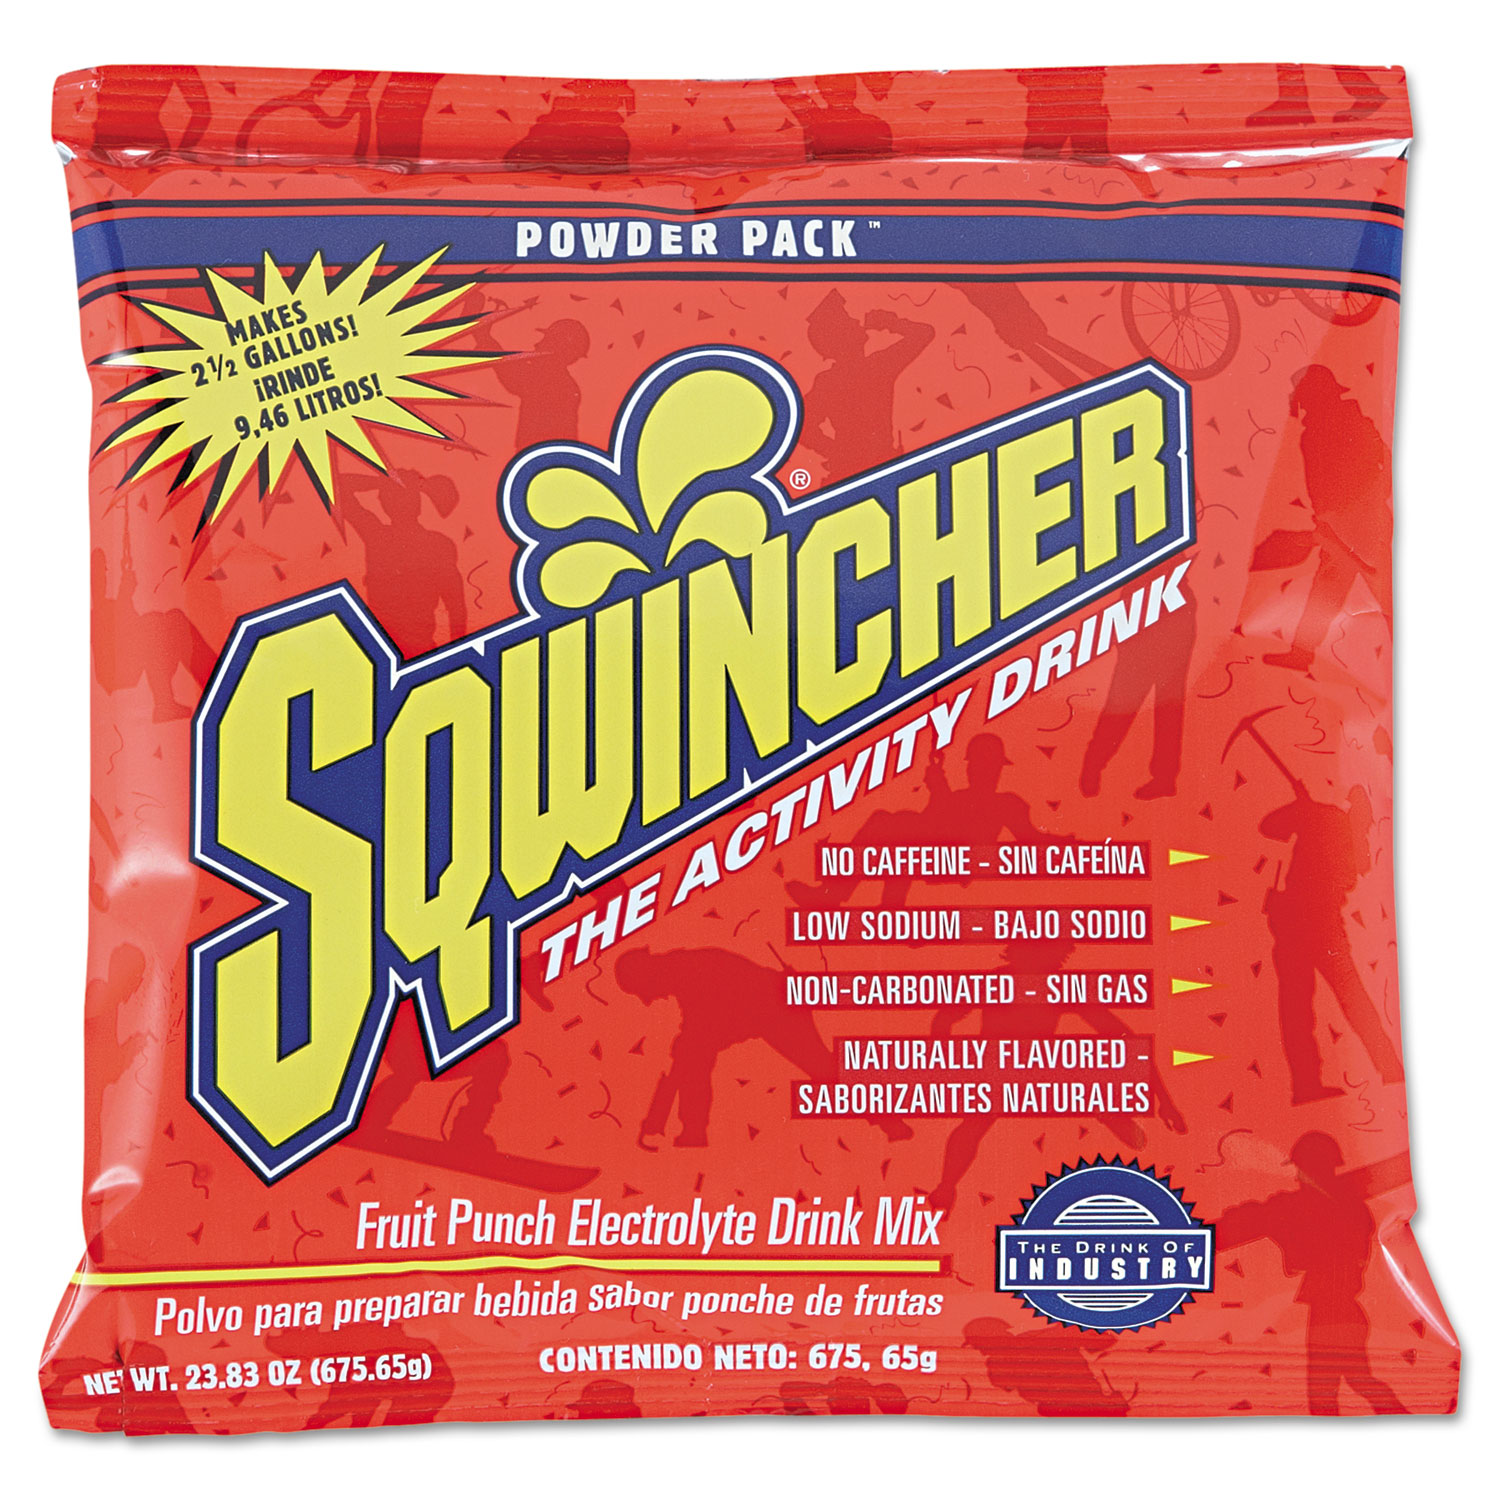 Powder Pack Concentrated Activity Drink, Fruit Punch, 23.83 oz Packet, 32/Carton